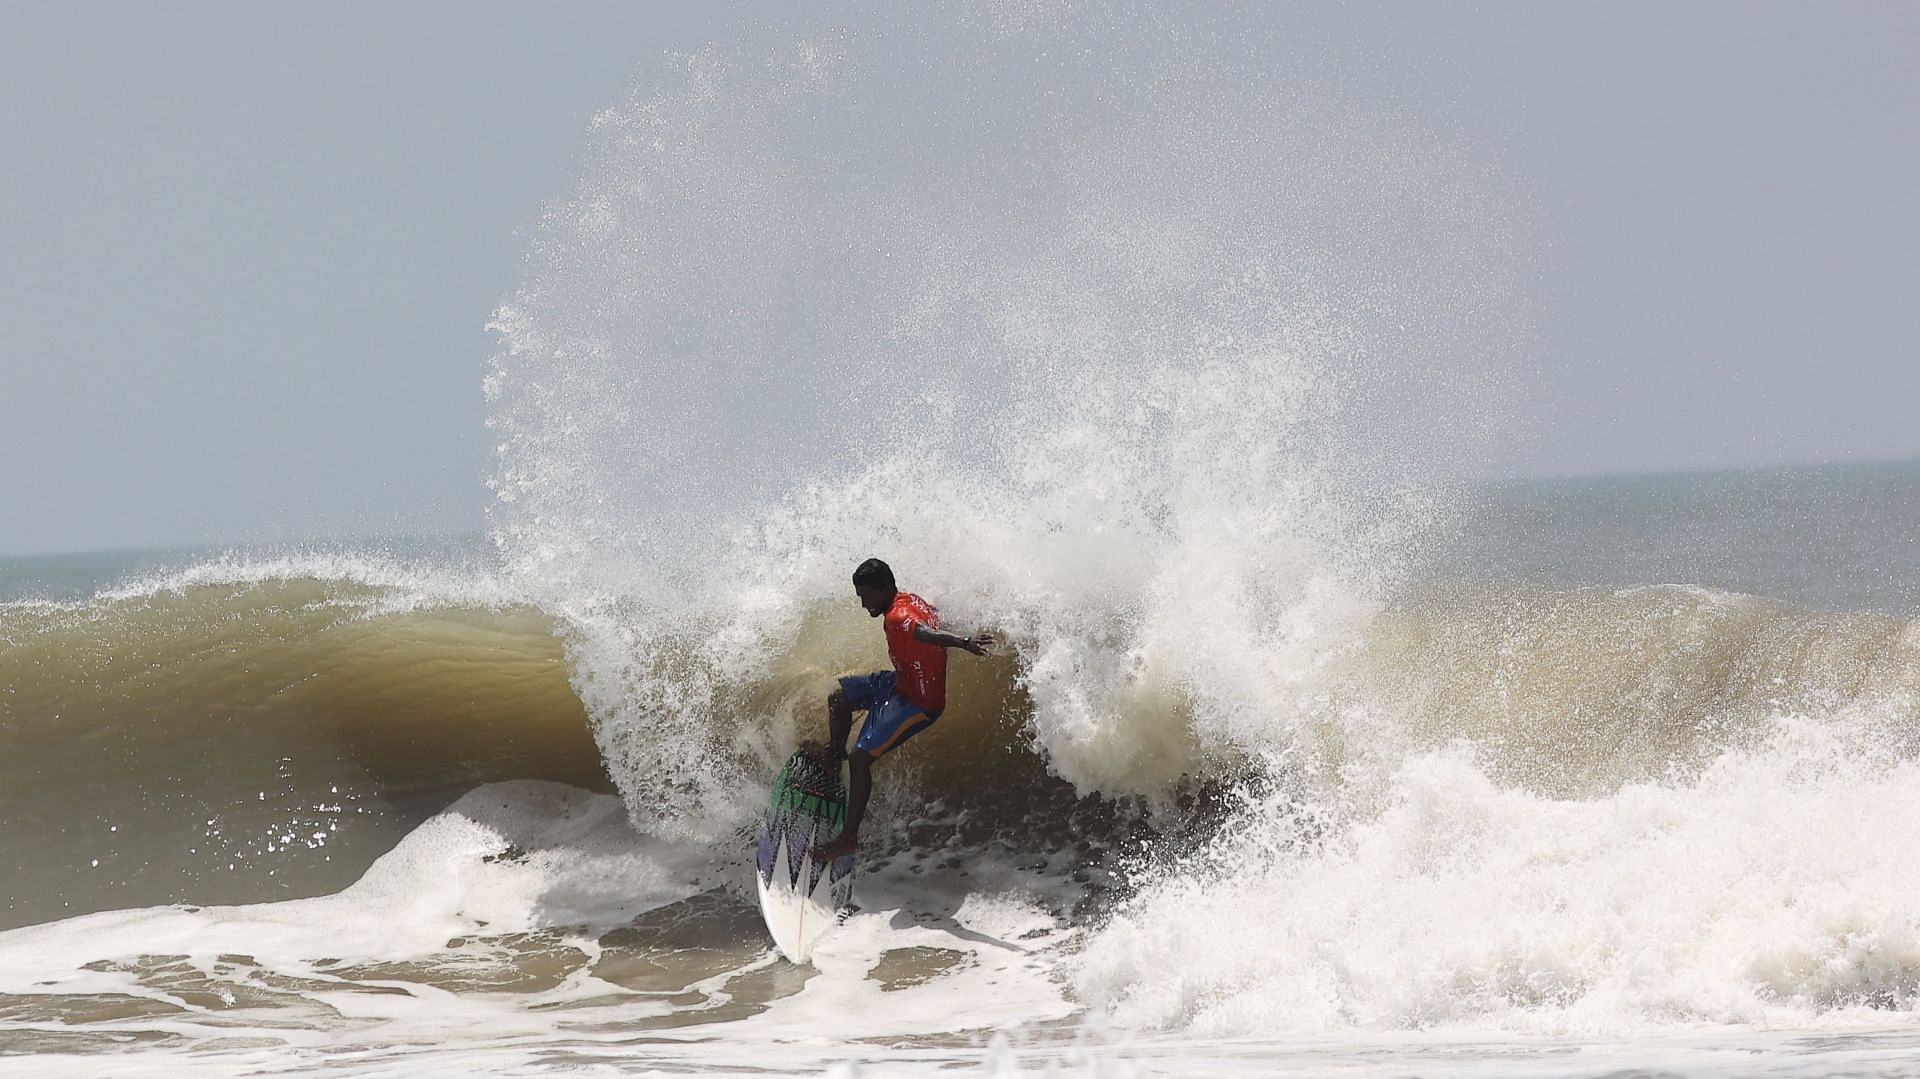 Exciting wins and impressive displays at the Inaugural Puducherry Surf Open of the East Coast Pro Tour